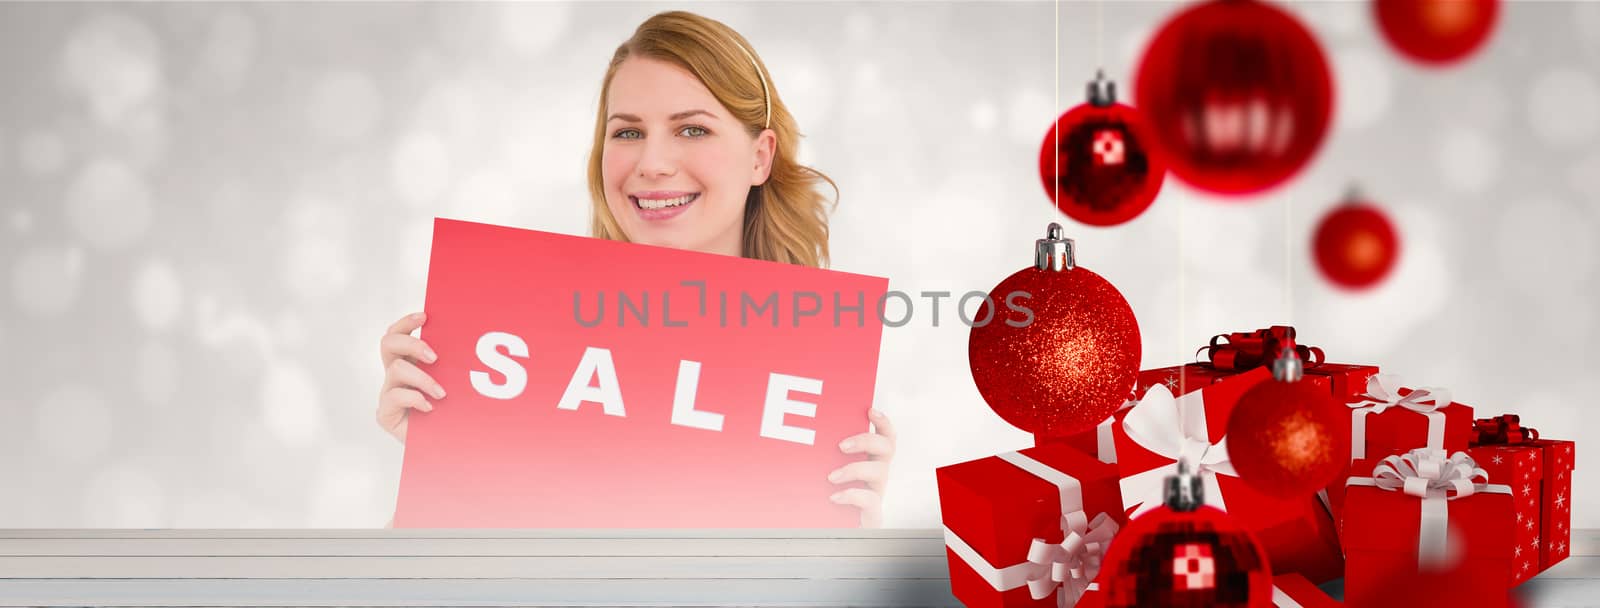 Cute blonde showing a red sale poster against painted blue wooden planks